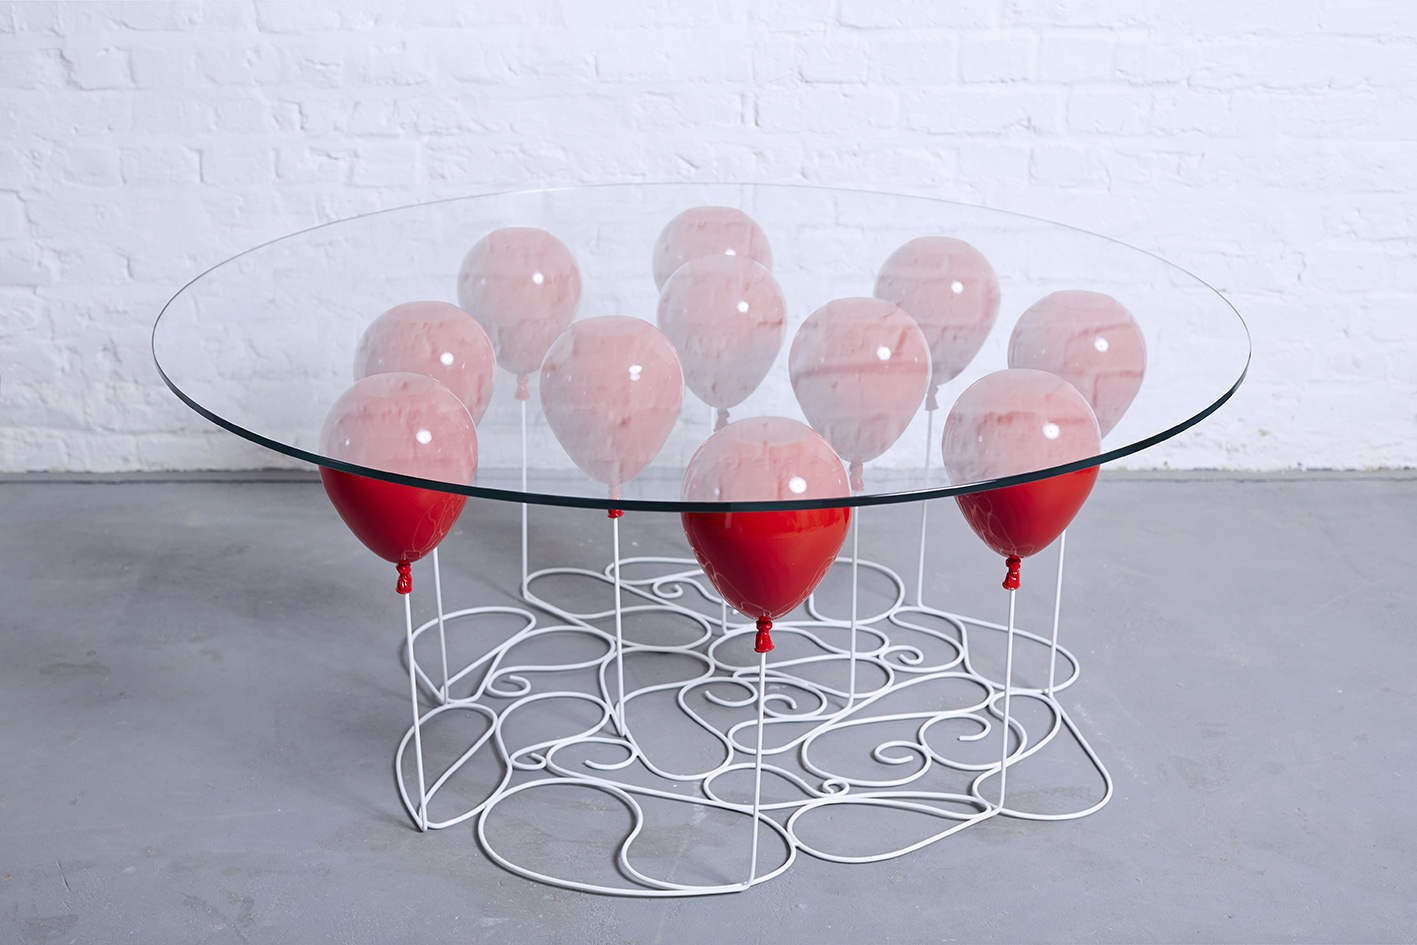 Red UP Balloon Coffee Table